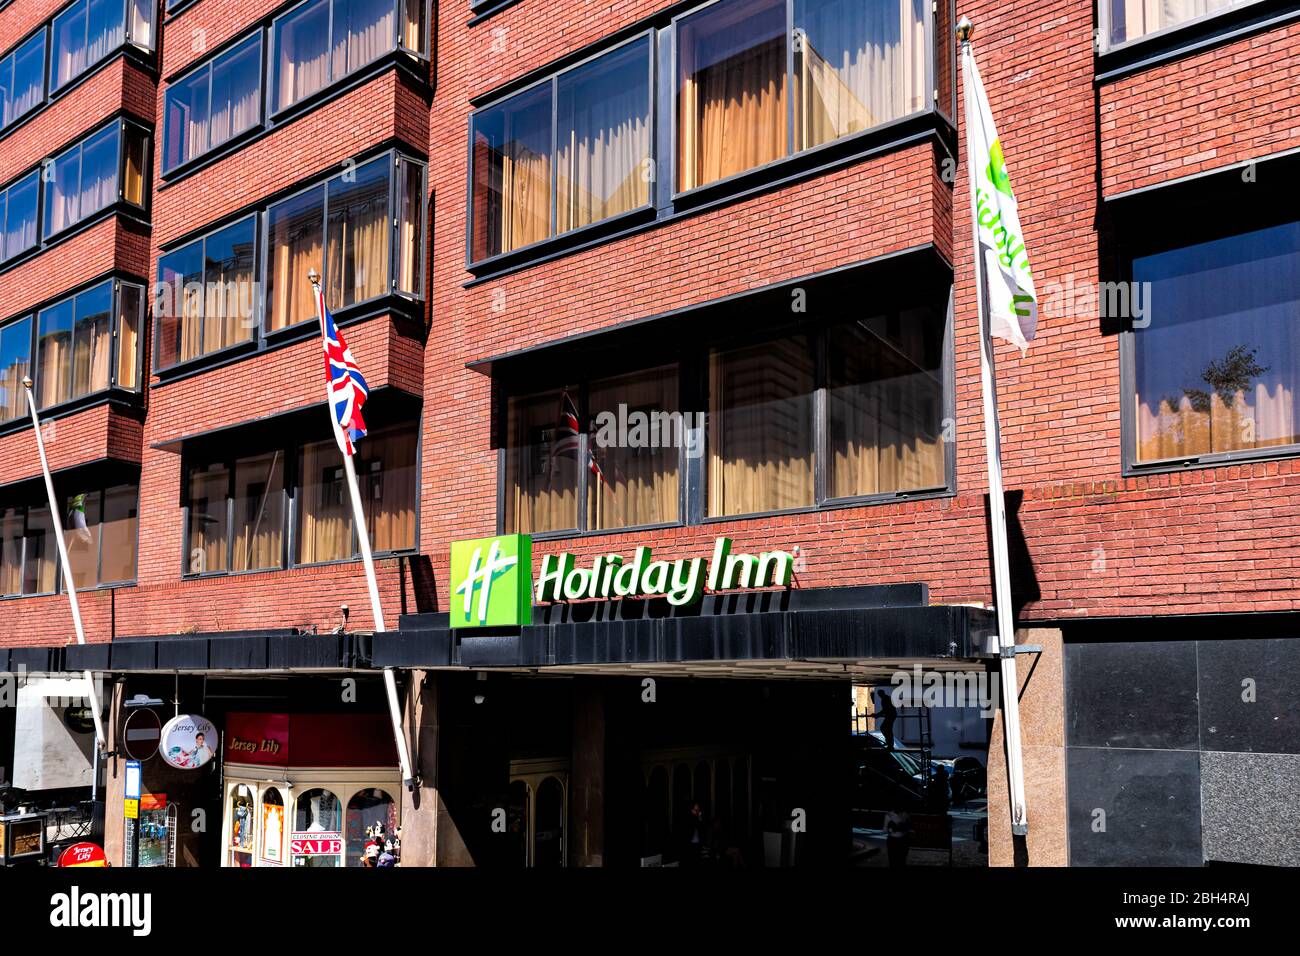 London, UK - June 22, 2018: Berkeley street in downtown Mayfair with sign for Holiday Inn hotel building and flags Stock Photo